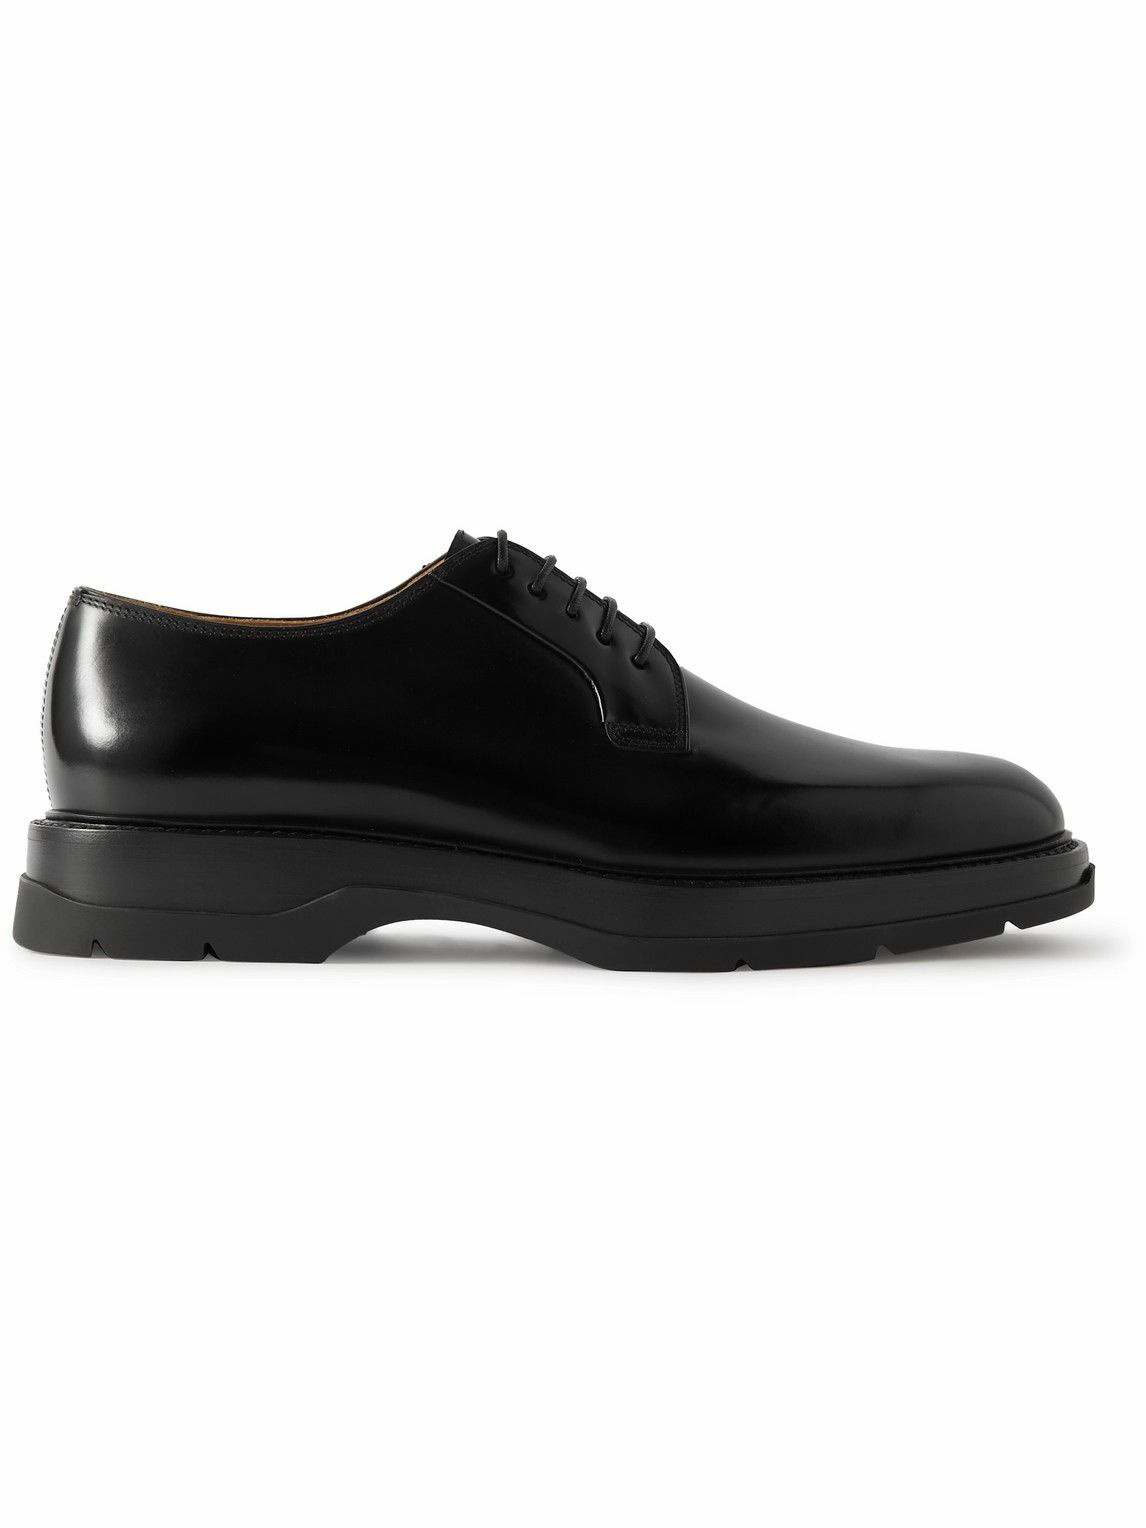 Dunhill - Hybrid Leather Derby Shoes - Black Dunhill